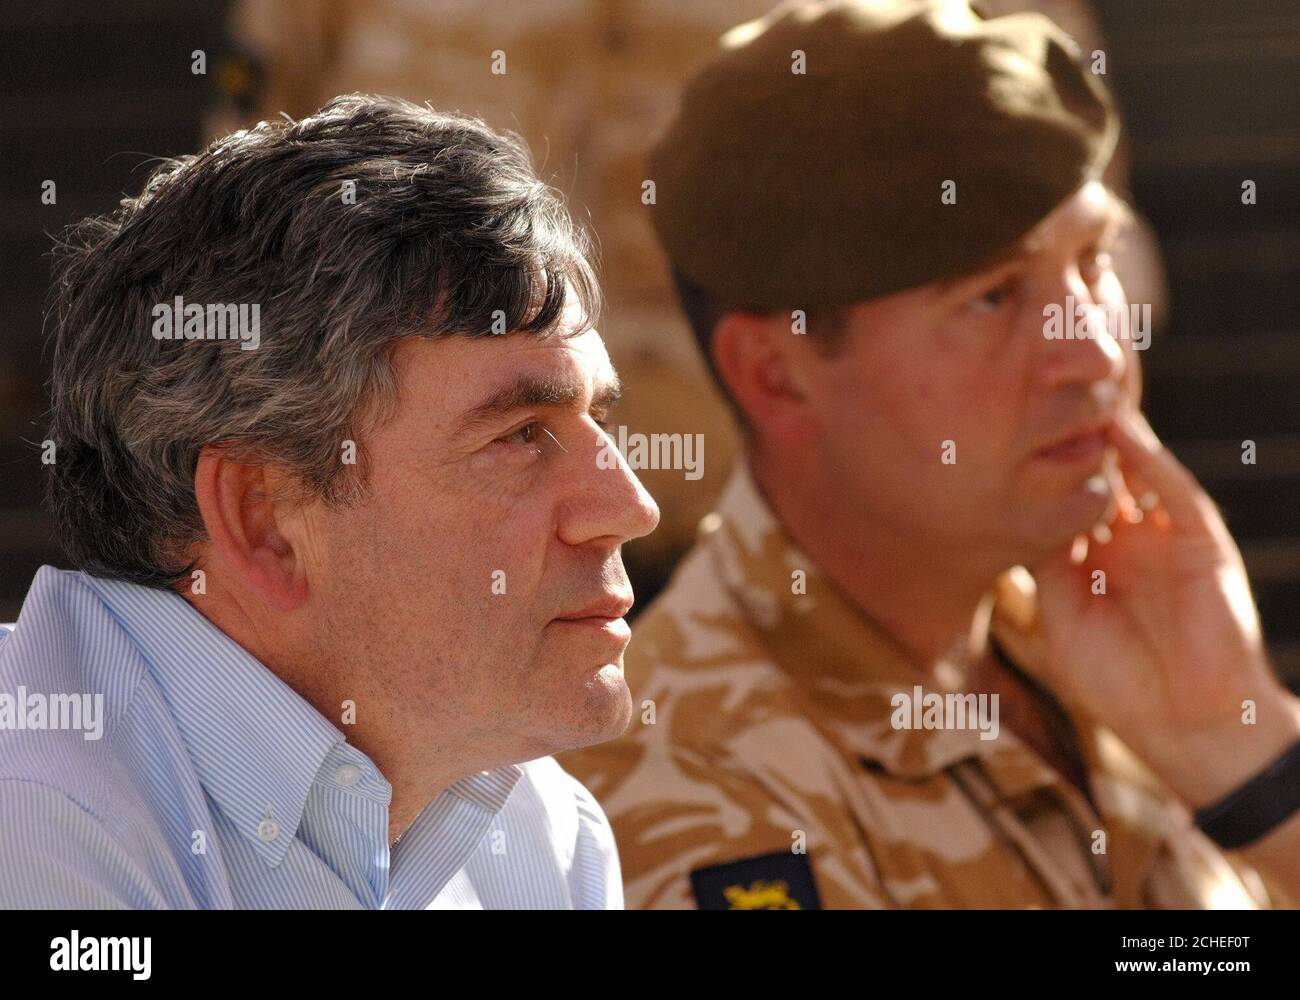 British Chancellor of the Exchequer Gordon Brown visits troops from the First Battalion, The Princess of Wales's Royal Regiment (PWRR), at Basra Air Station in southern Iraq where he announced at least Â£100 million in new aid for reconstruction. Stock Photo